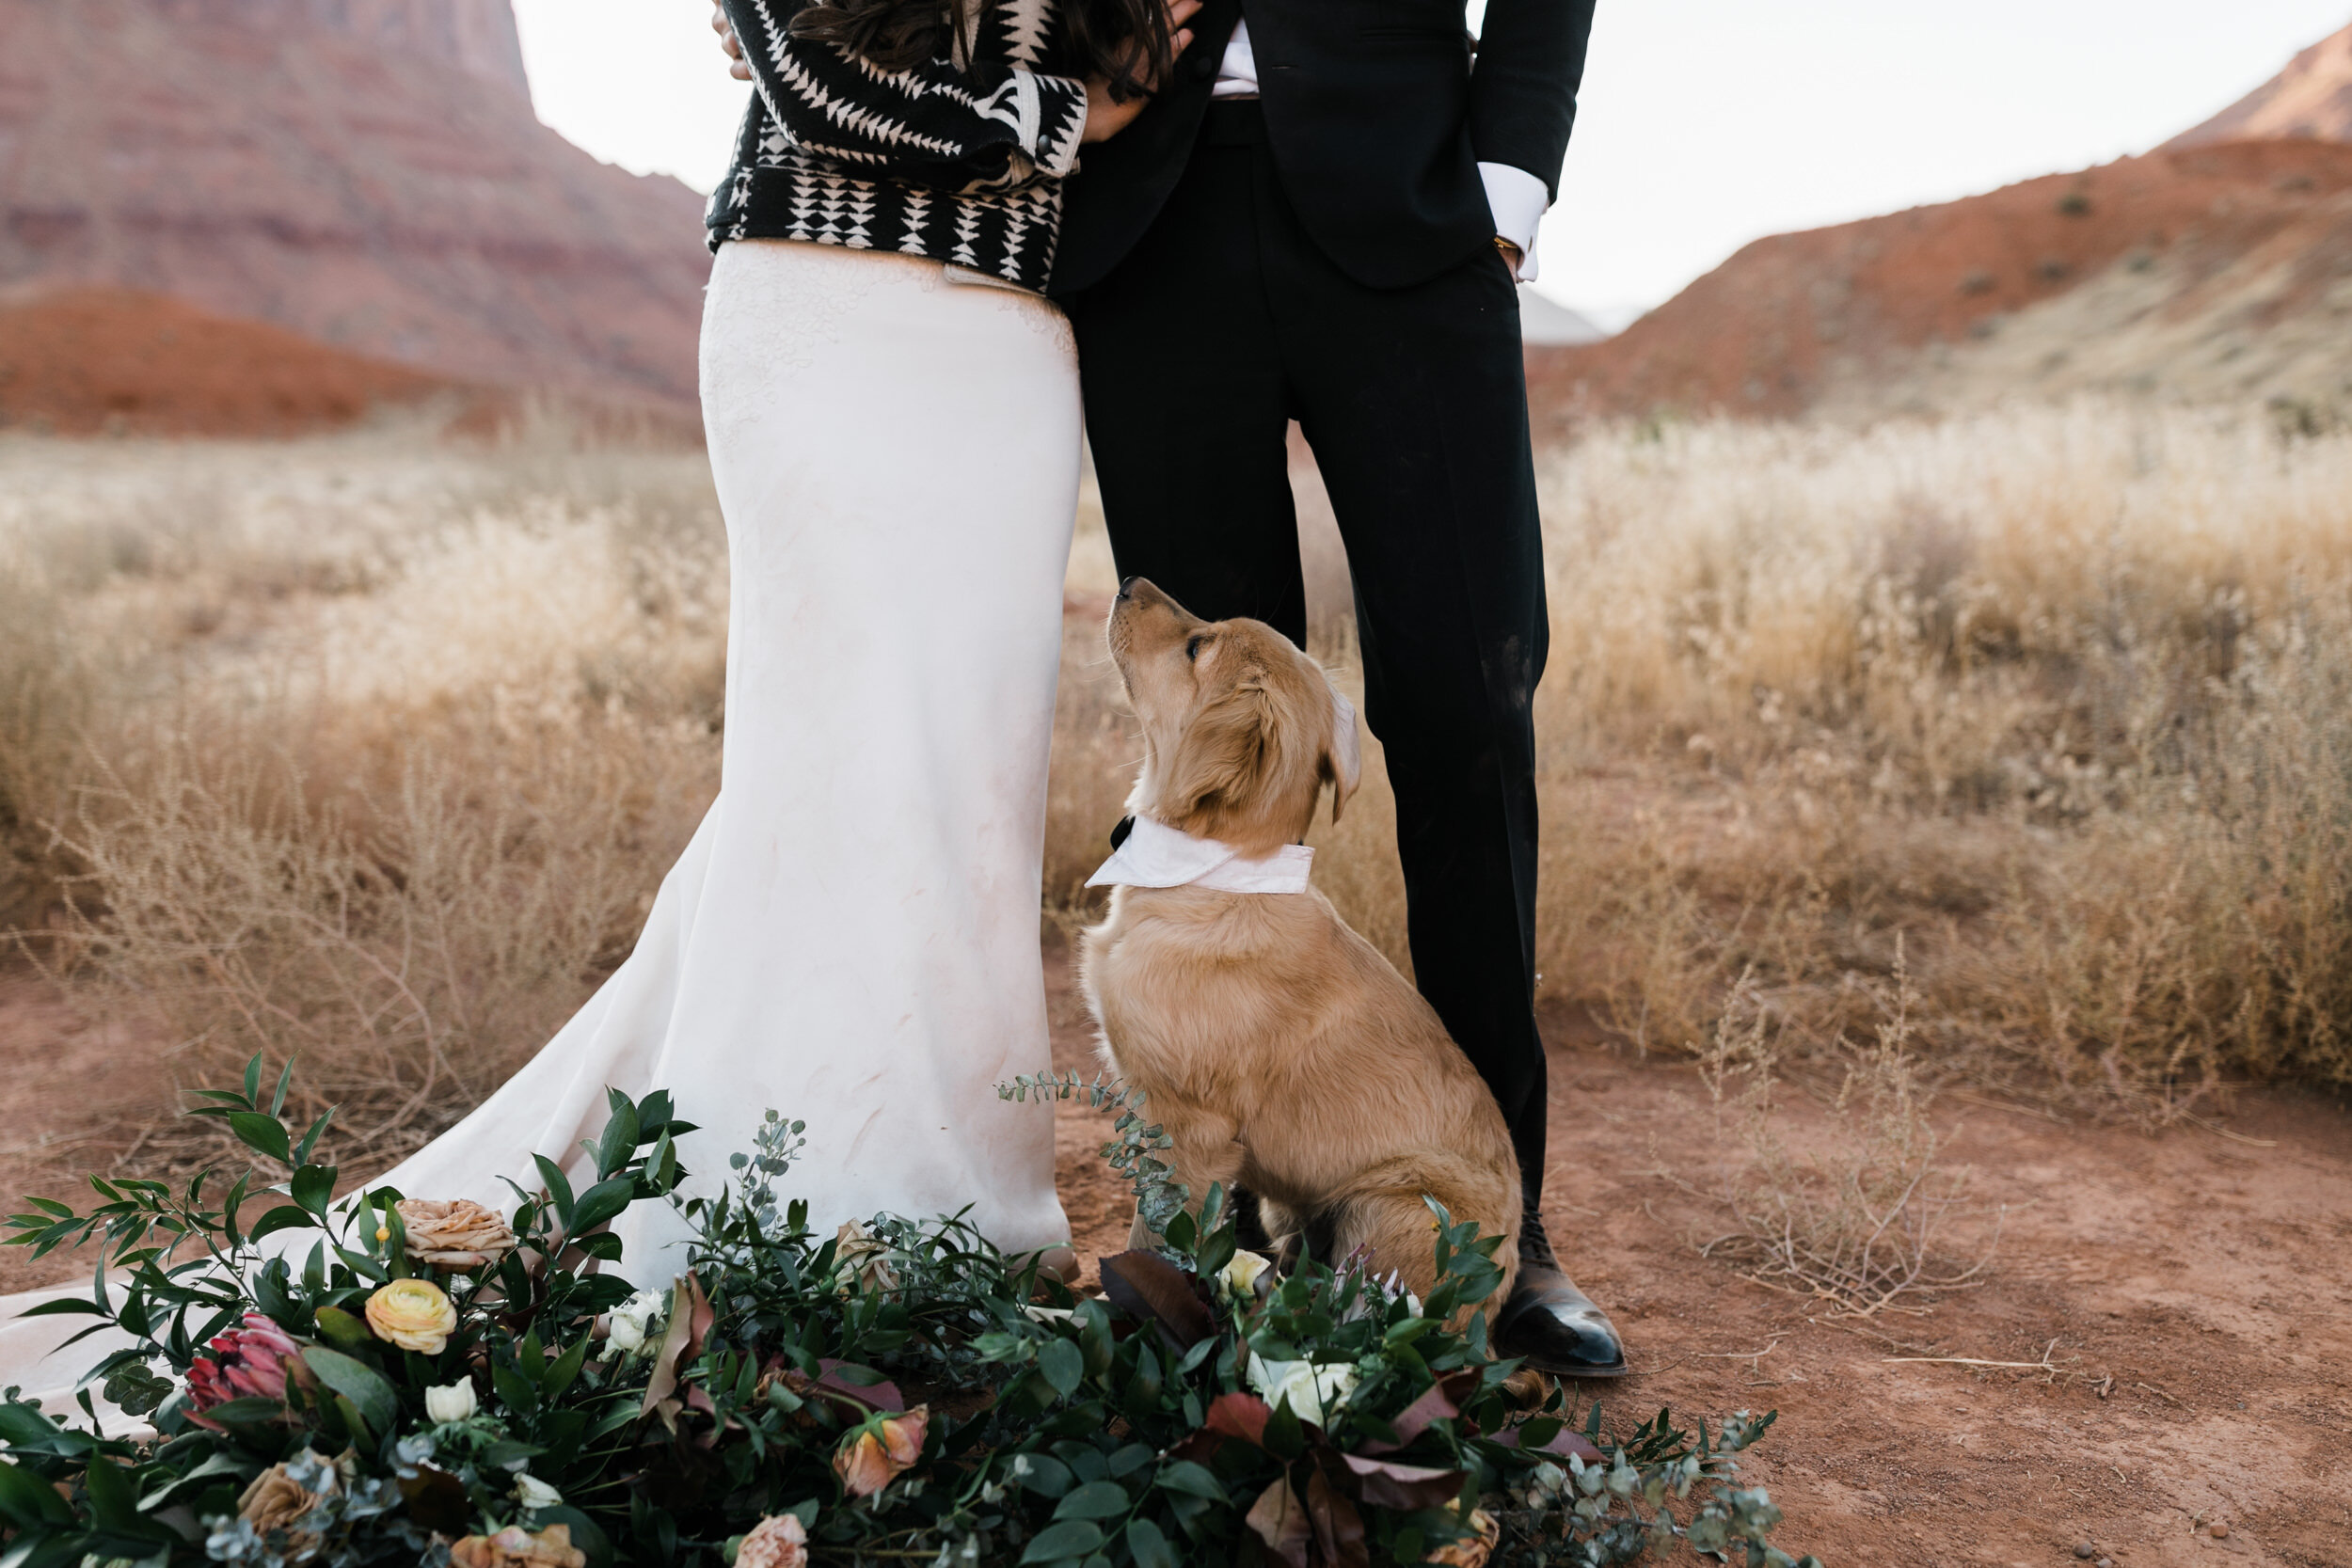 Moab Elopement | wedding with a golden retriever puppy | The Hearnes Adventure Photography